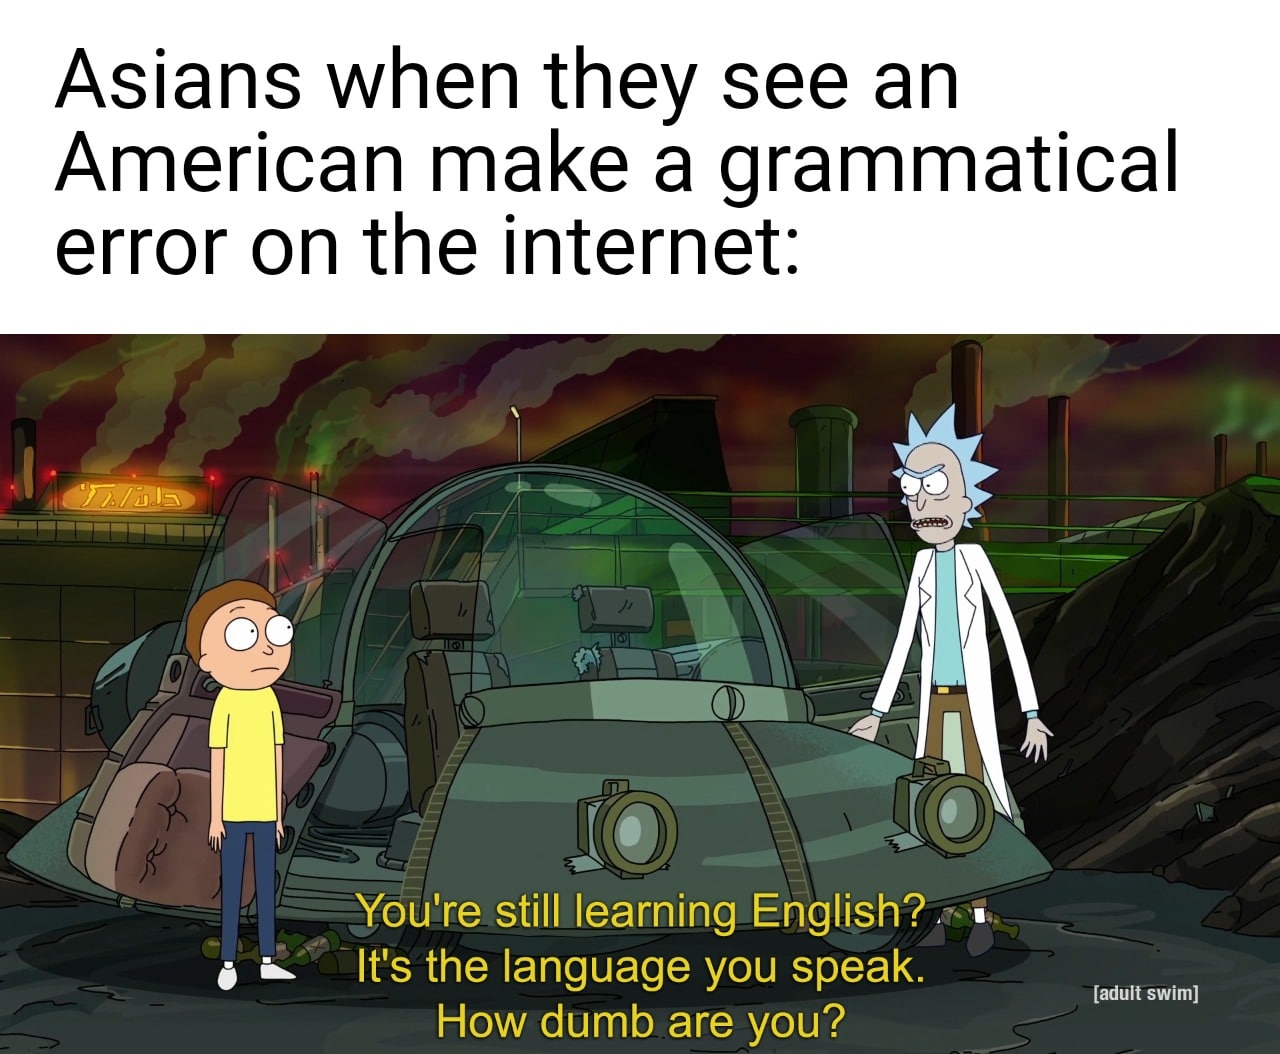 Dank, English, Americans, Dutch, Chinese, Asians Dank Memes Dank, English, Americans, Dutch, Chinese, Asians text: Asians when they see an American make a grammatical error on the internet: —you're still learning English? It's the language you speak. [adult swim] How dumb are you? 